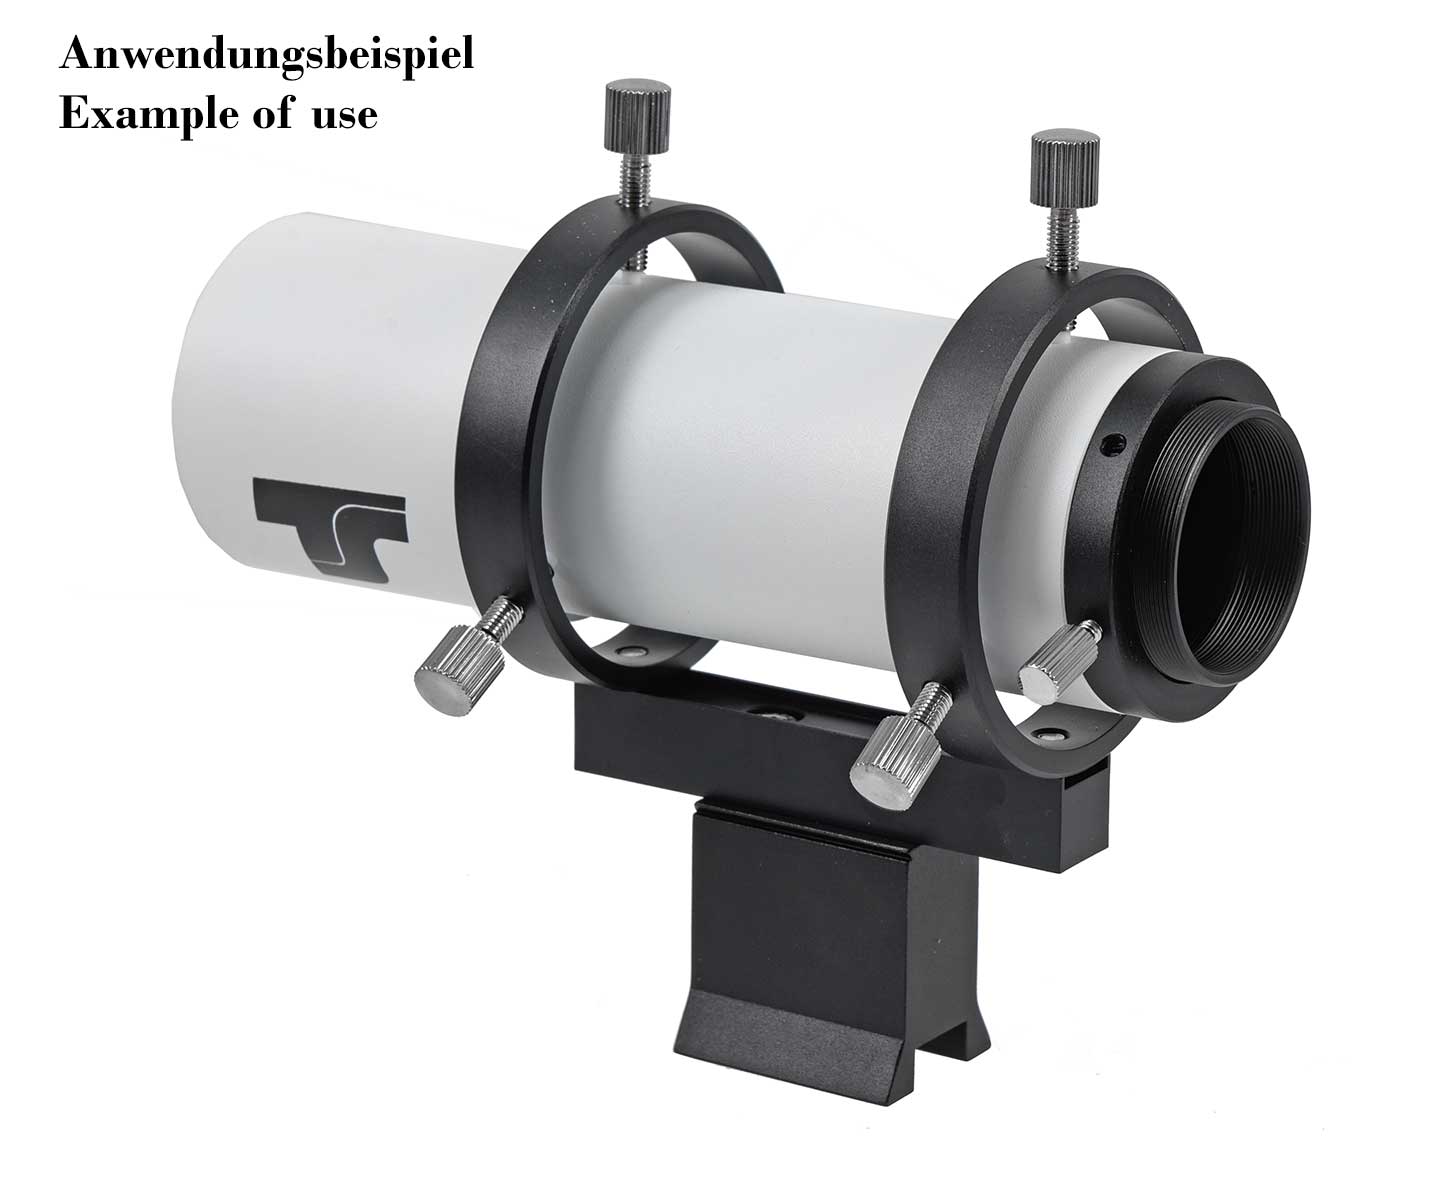 
TS-Optics 60 mm Angled Finder and Guide Scope with 90° View - 1.25" and T2 Connection [EN]
